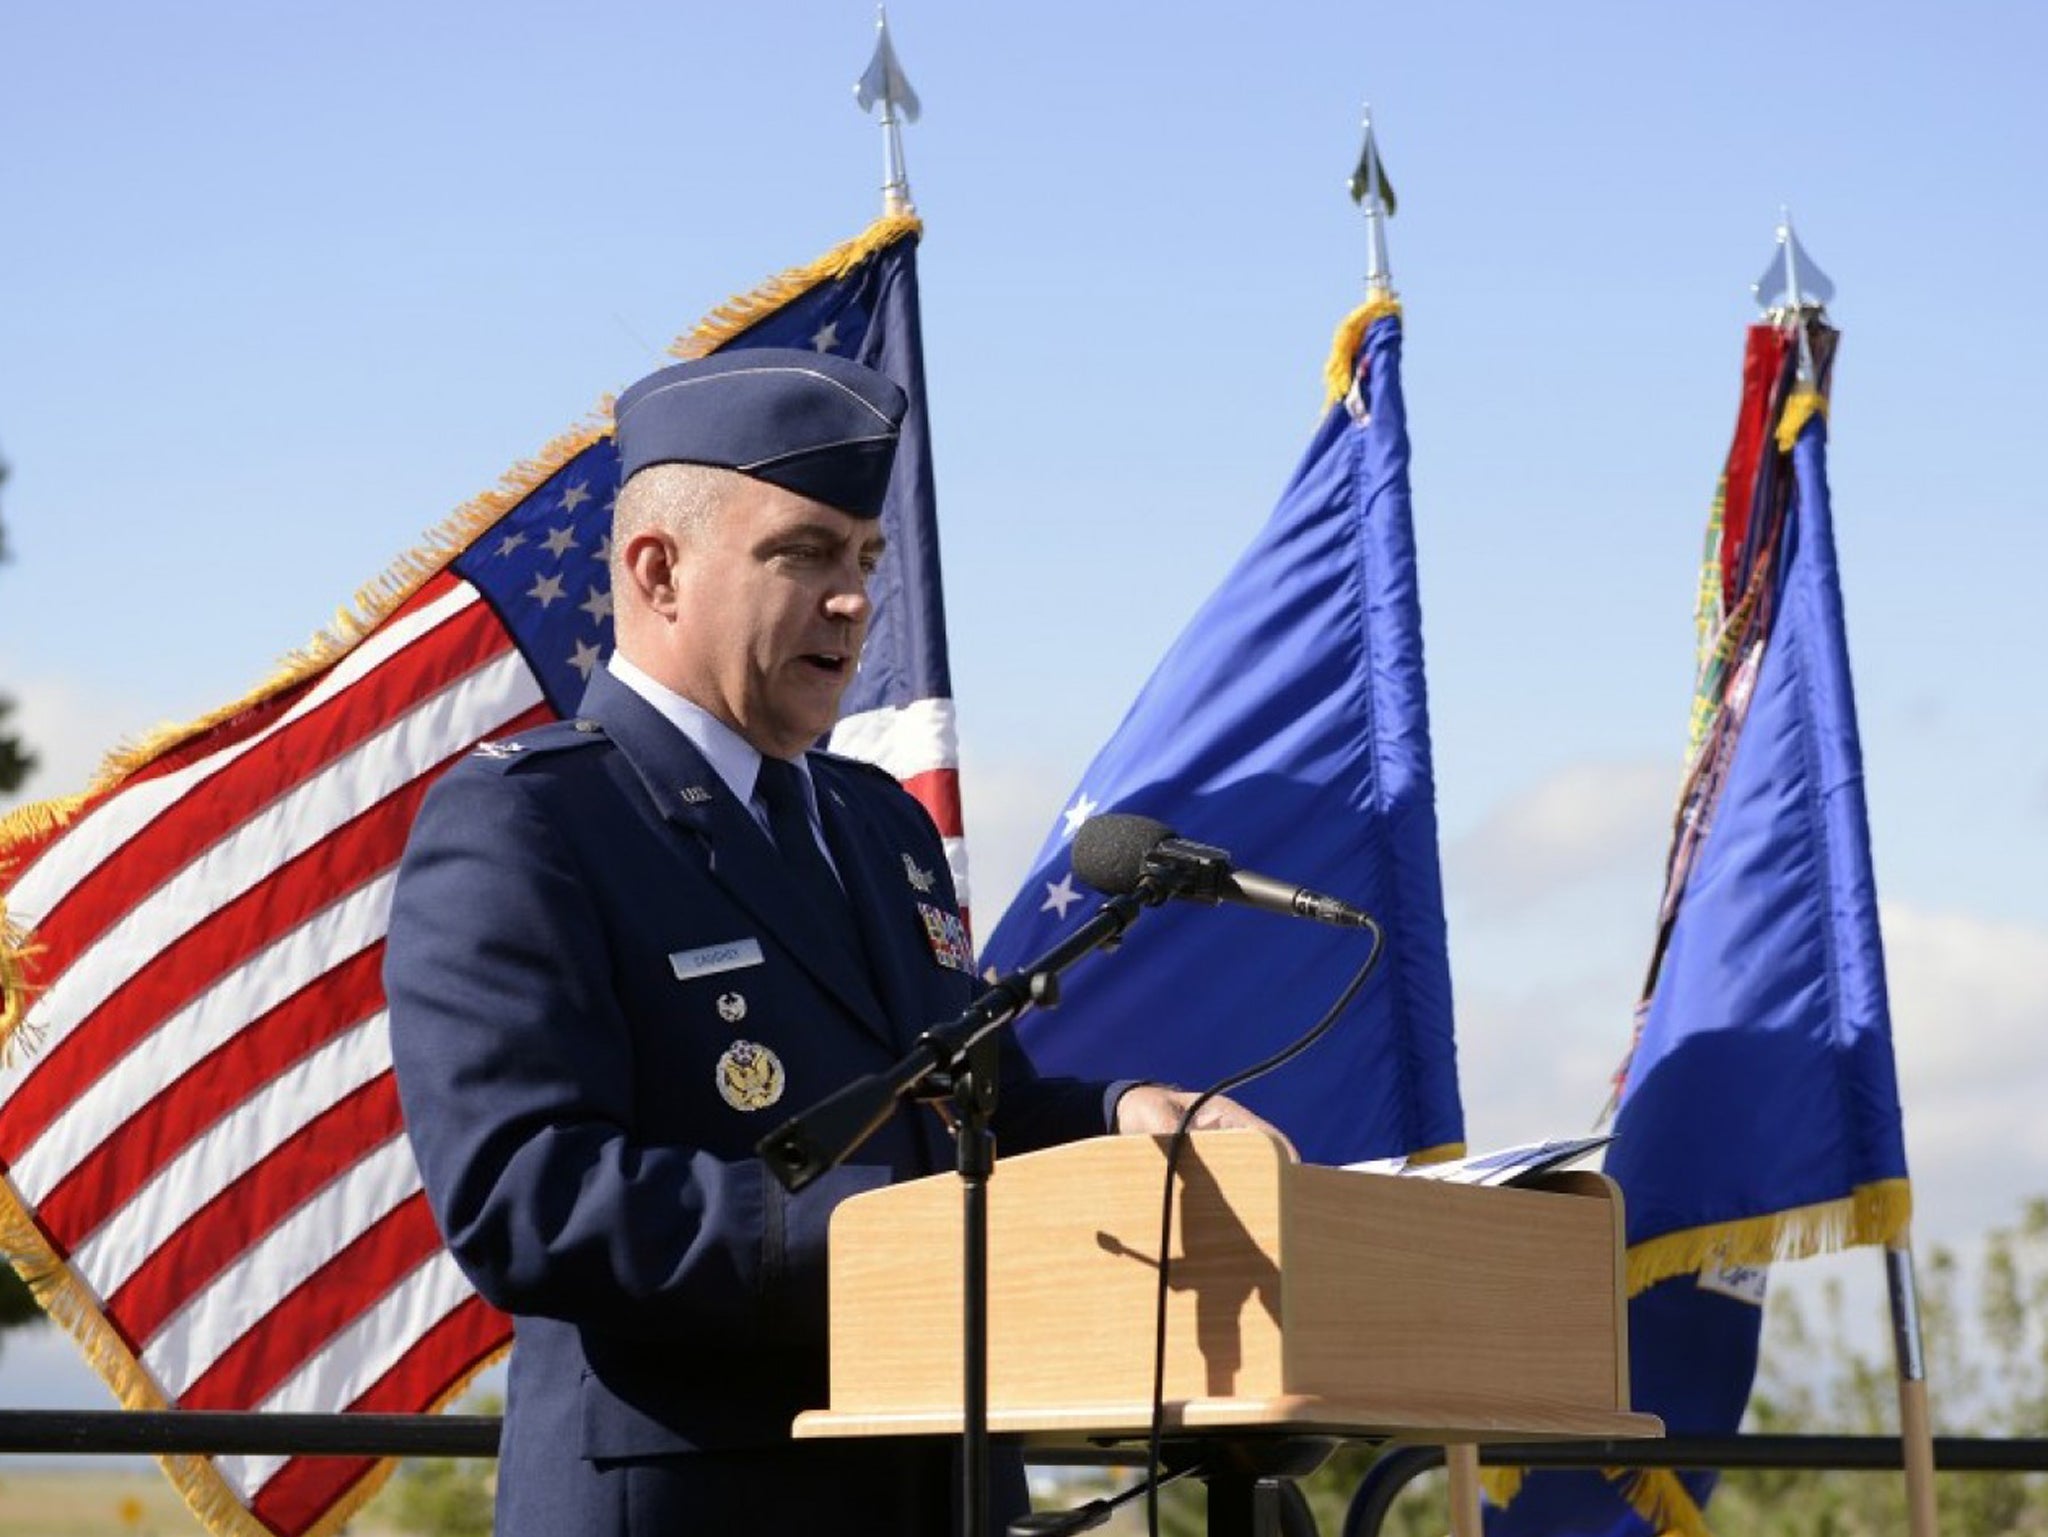 Air Force Col. Eugene Marcus Caughey, formerly vice commander of the 50th Space Wing, was found dead at his Colorado Springs home Sunday, a few weeks before he was to be court-martialed on sexual-assault charges. In this 2014 photo, Caughey speaks at a ceremony at Schriever Air Force Base marking the anniversary of the attack on the Pentagon on Sept. 11, 2001